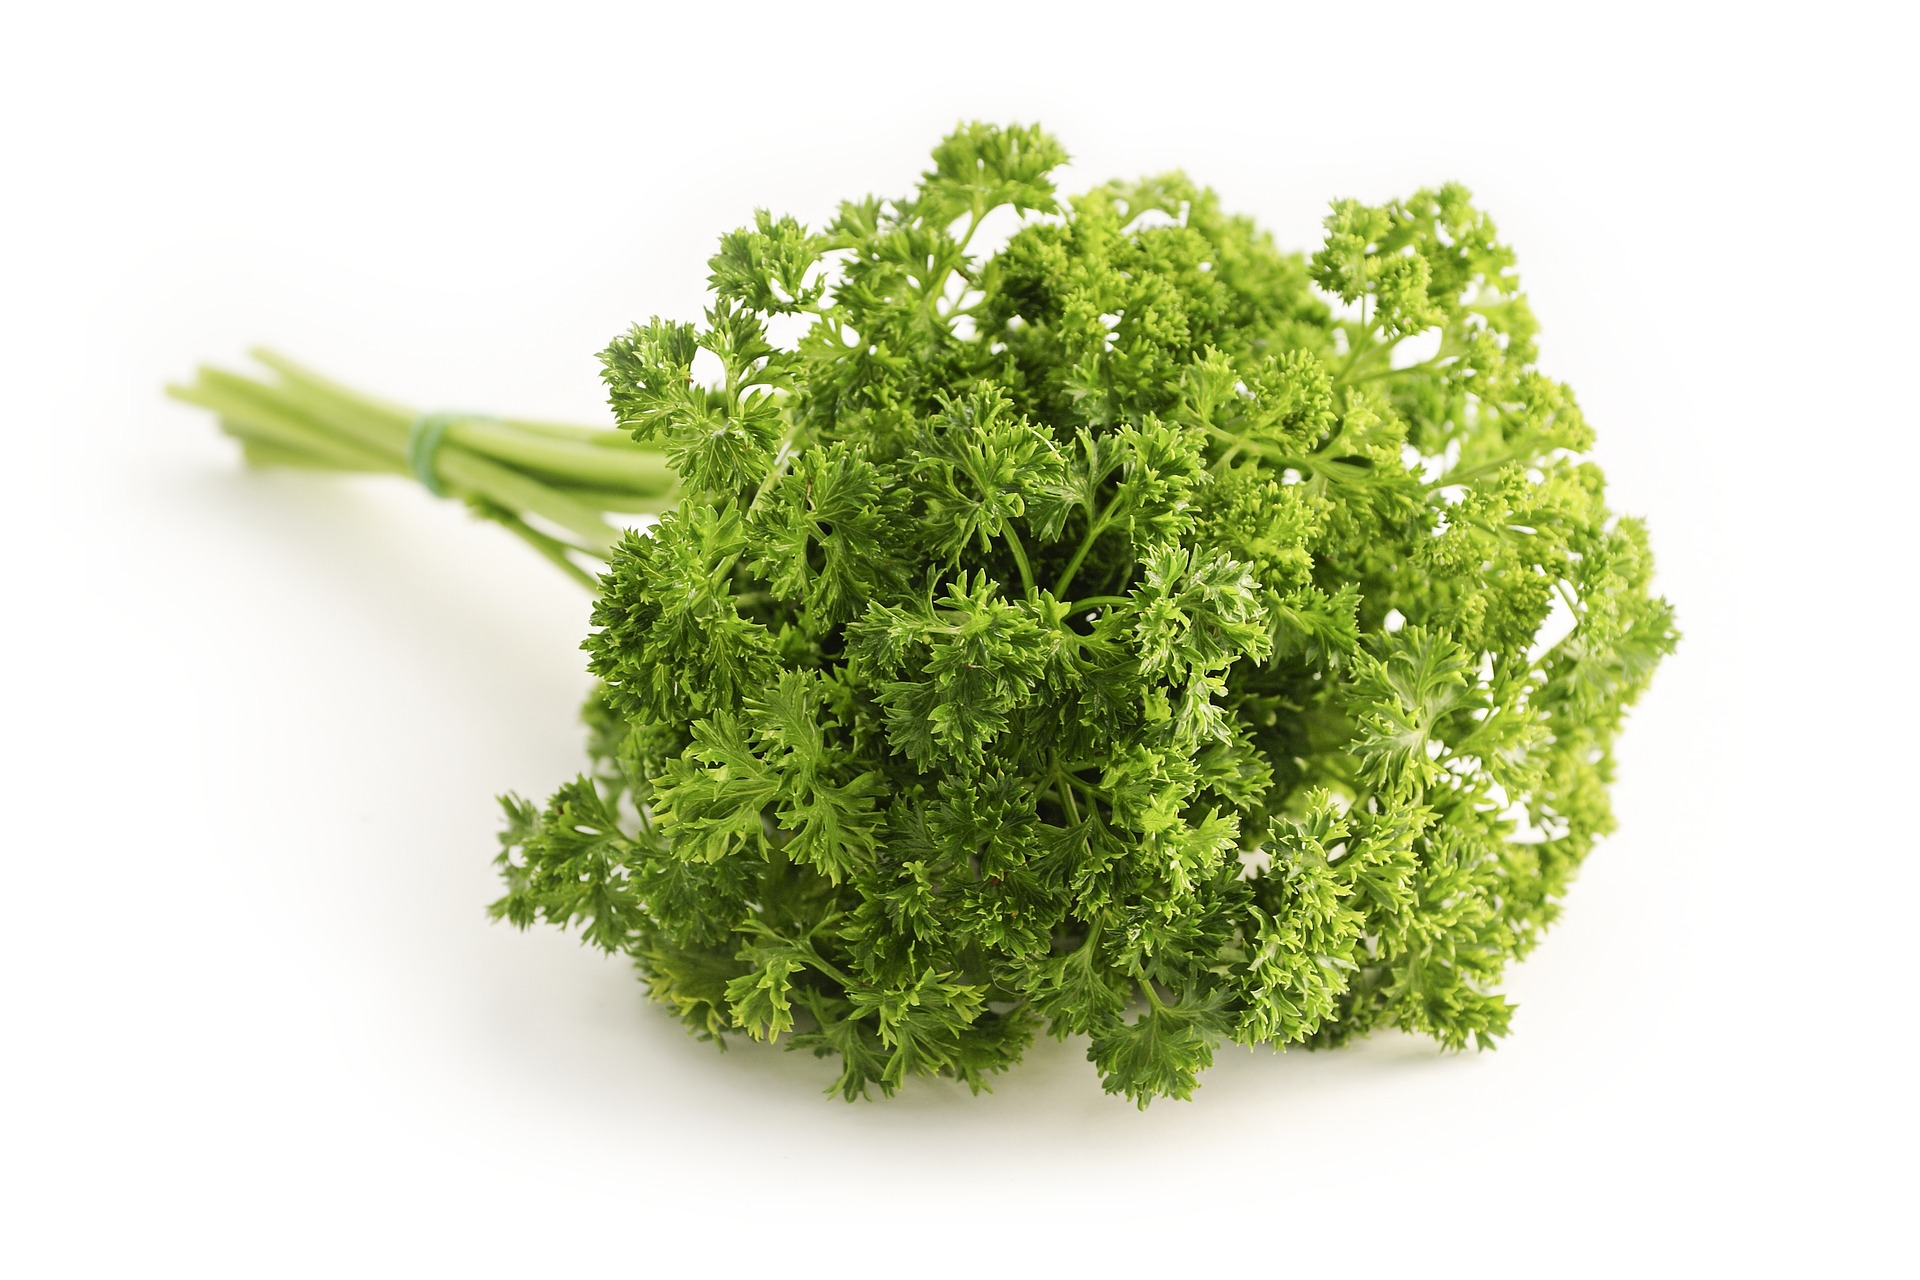 Parsley: Not Your Usual Garnish